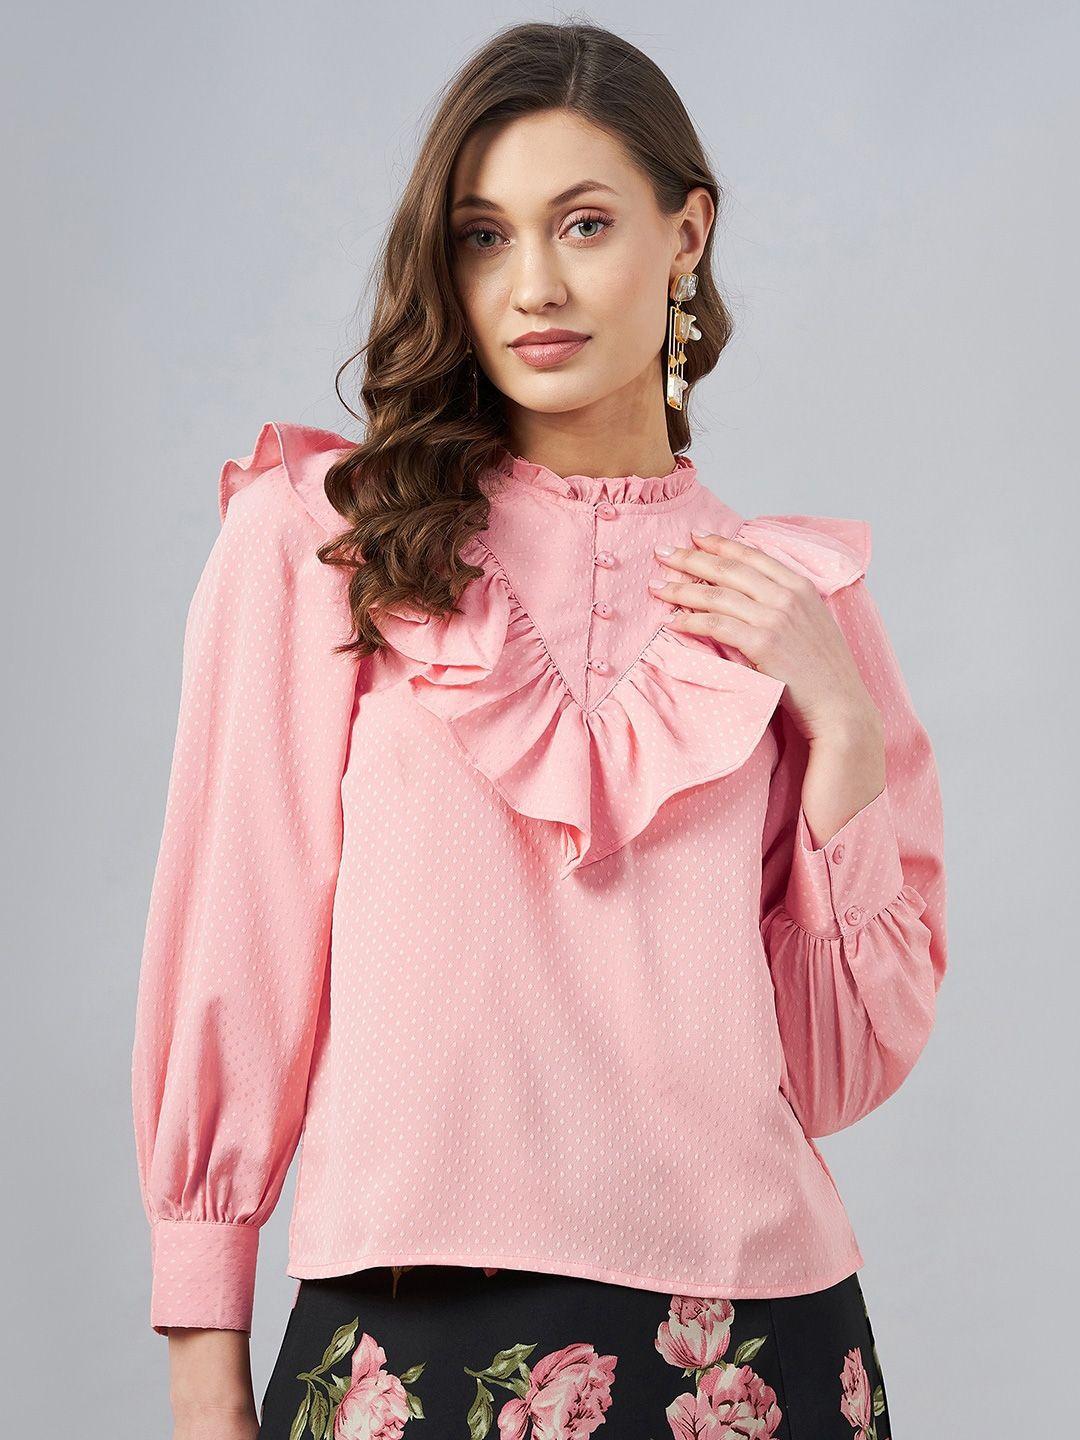 marie claire print ruffles crepe top